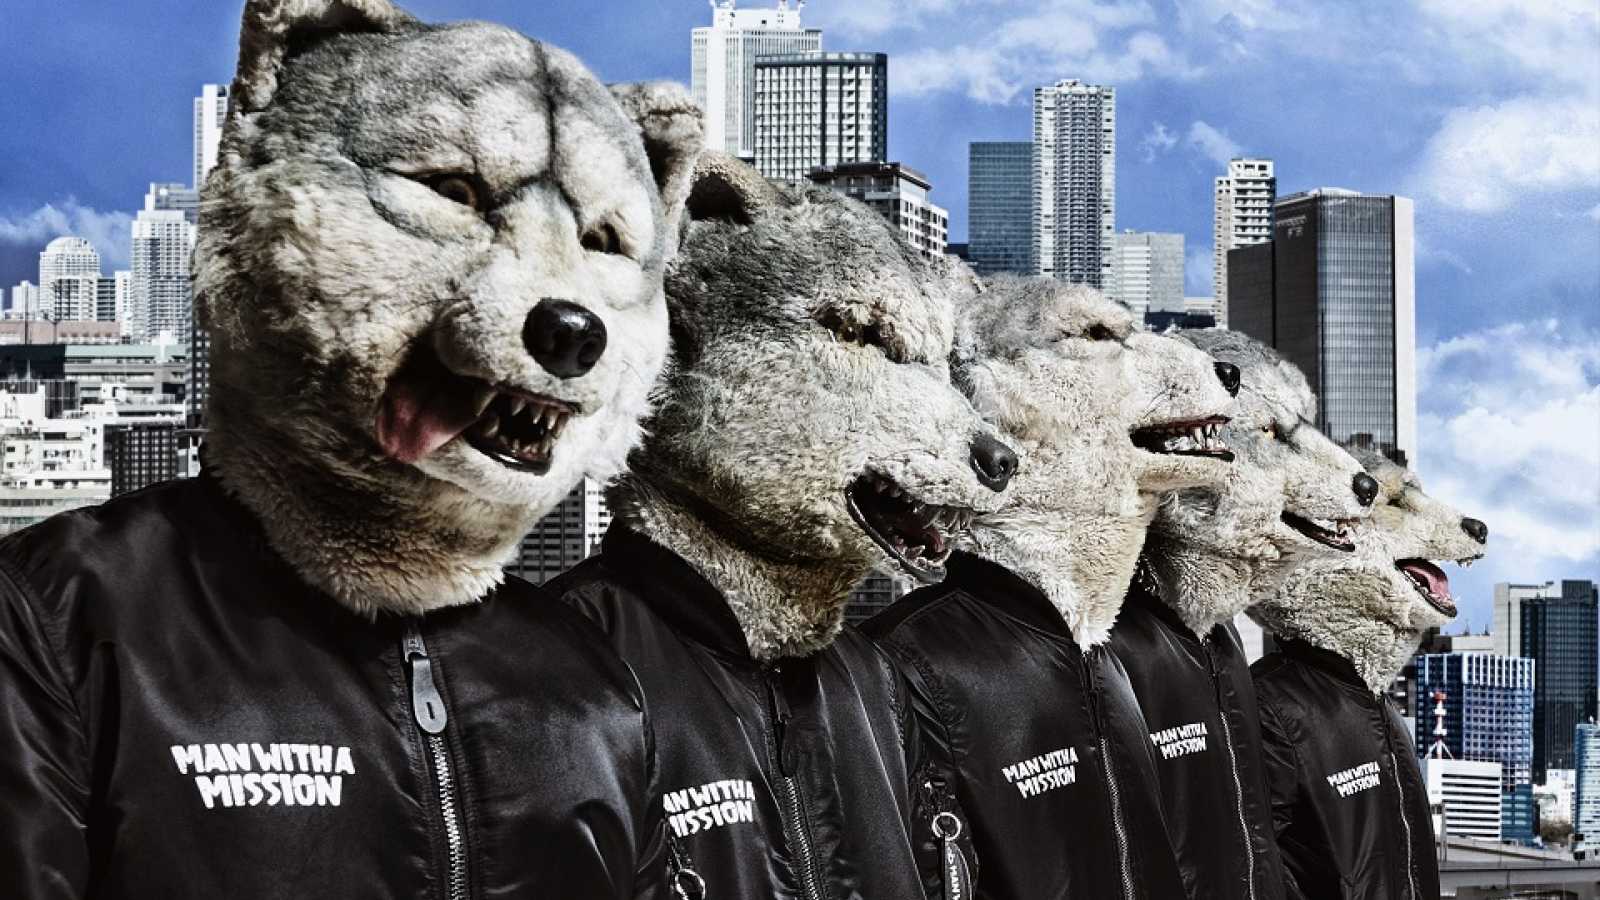 MAN WITH A MISSION veröffentlichten drei fortlaufende Digital-Singles © MAN WITH A MISSION. All rights reserved.